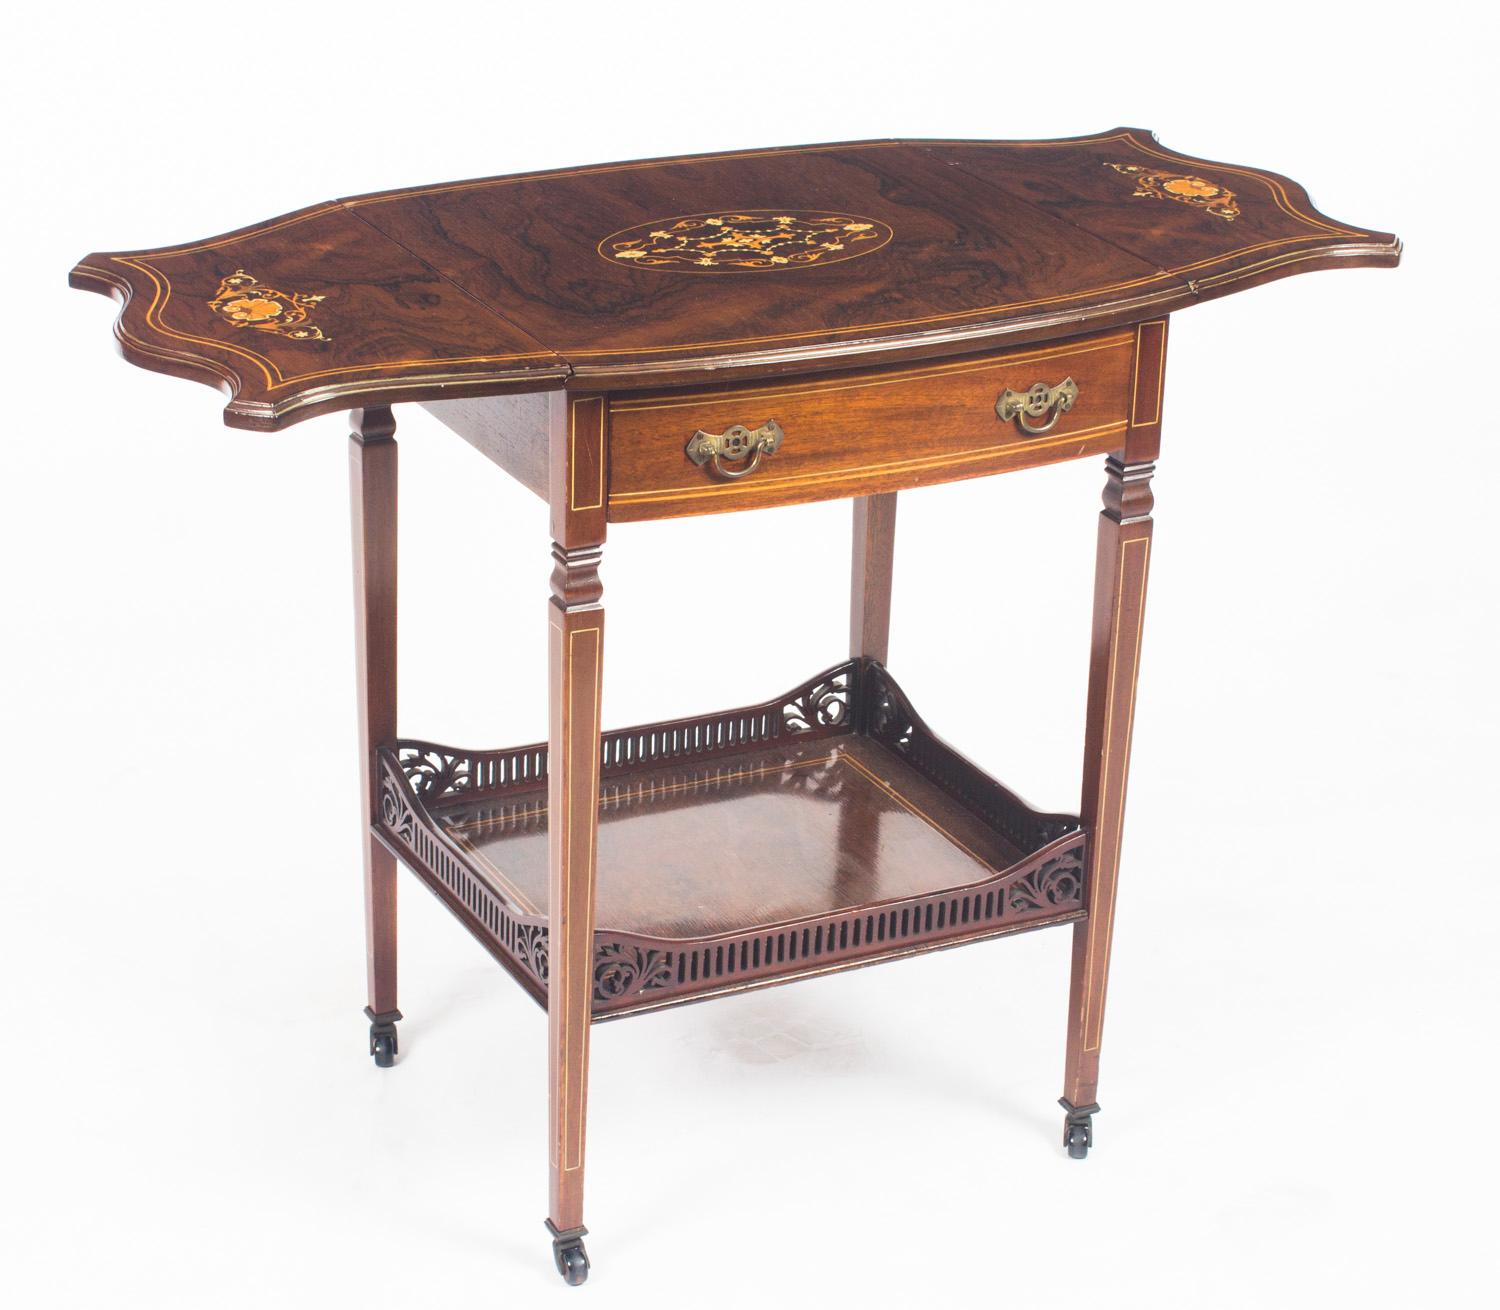 This is a wonderful pair of antique English shaped-oval gonçalo alves marquetry inlaid occasional tables, late 19th century in date.

The tables are beautifully inlaid in the elegant Edwardian manner with satinwood and ebonized crossbanded